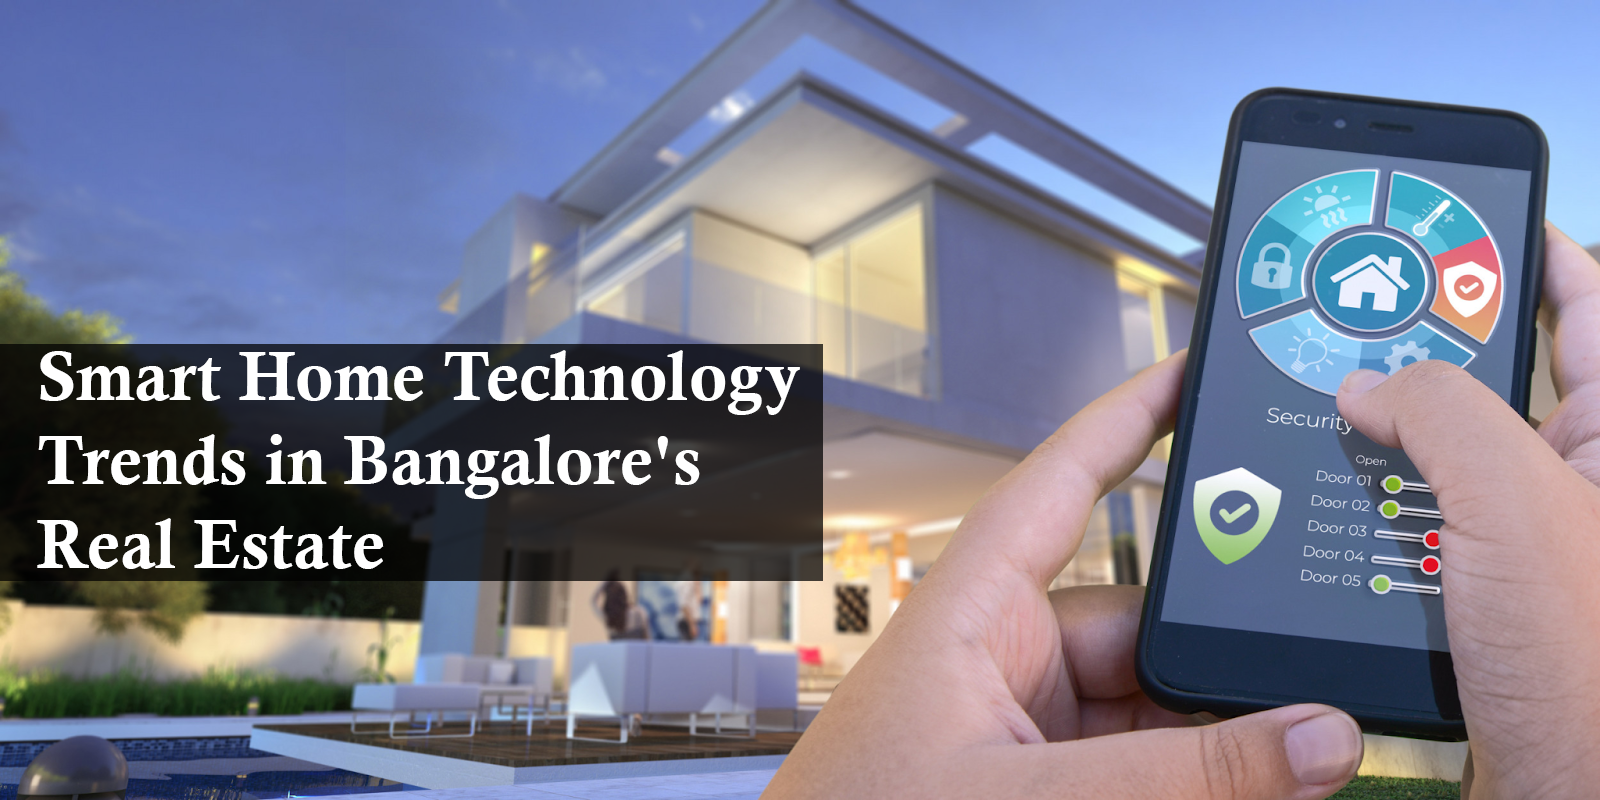  Smart Home Technology Trends in Bangalore's Real Estate